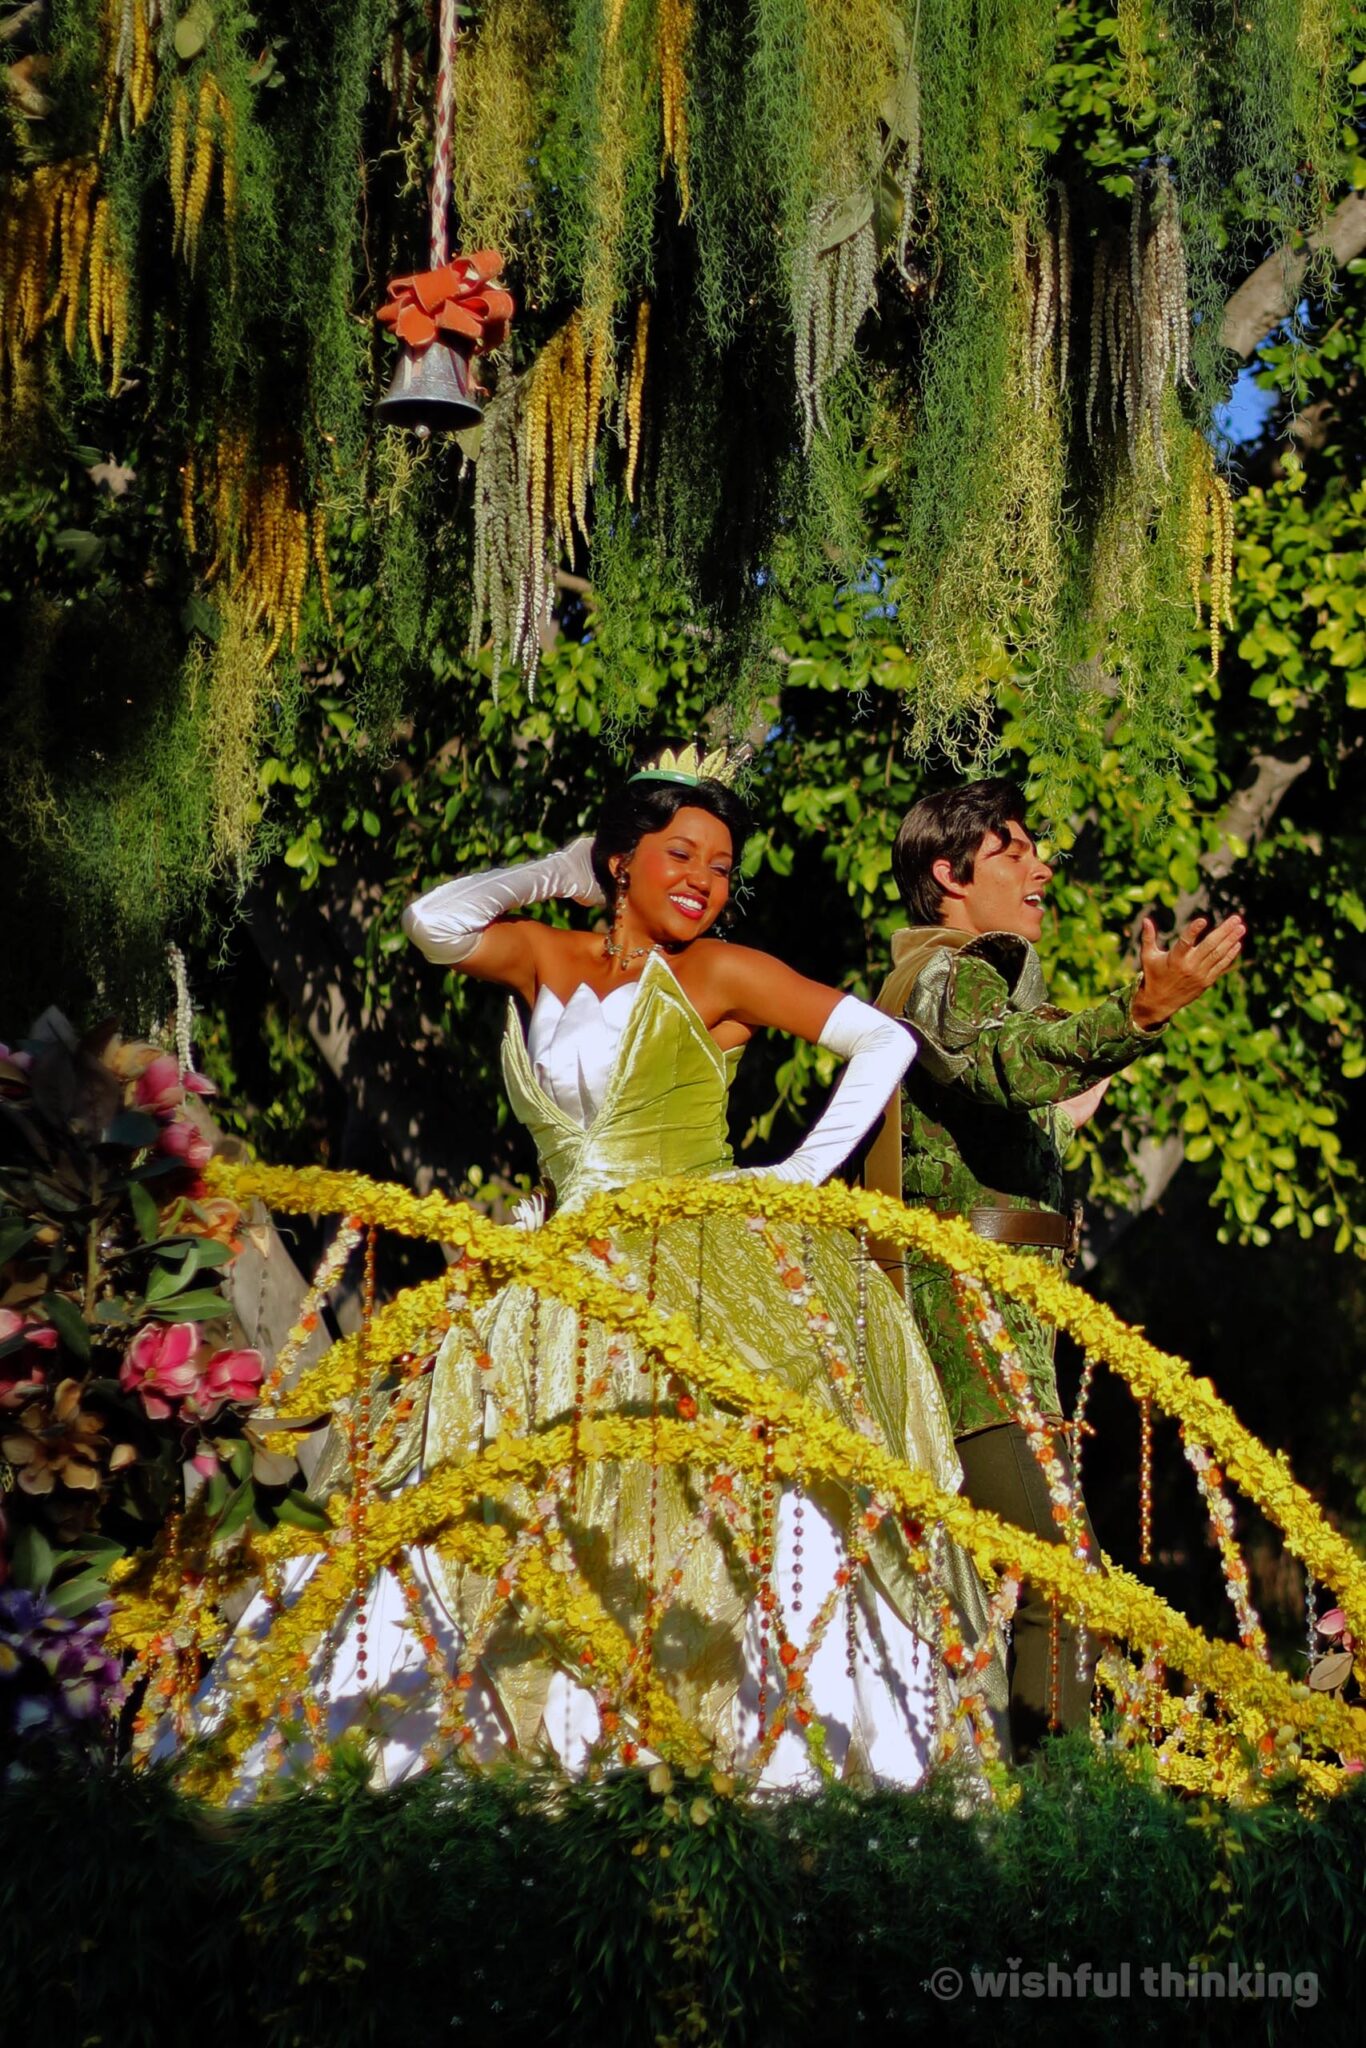 Tiana and Naveen from 